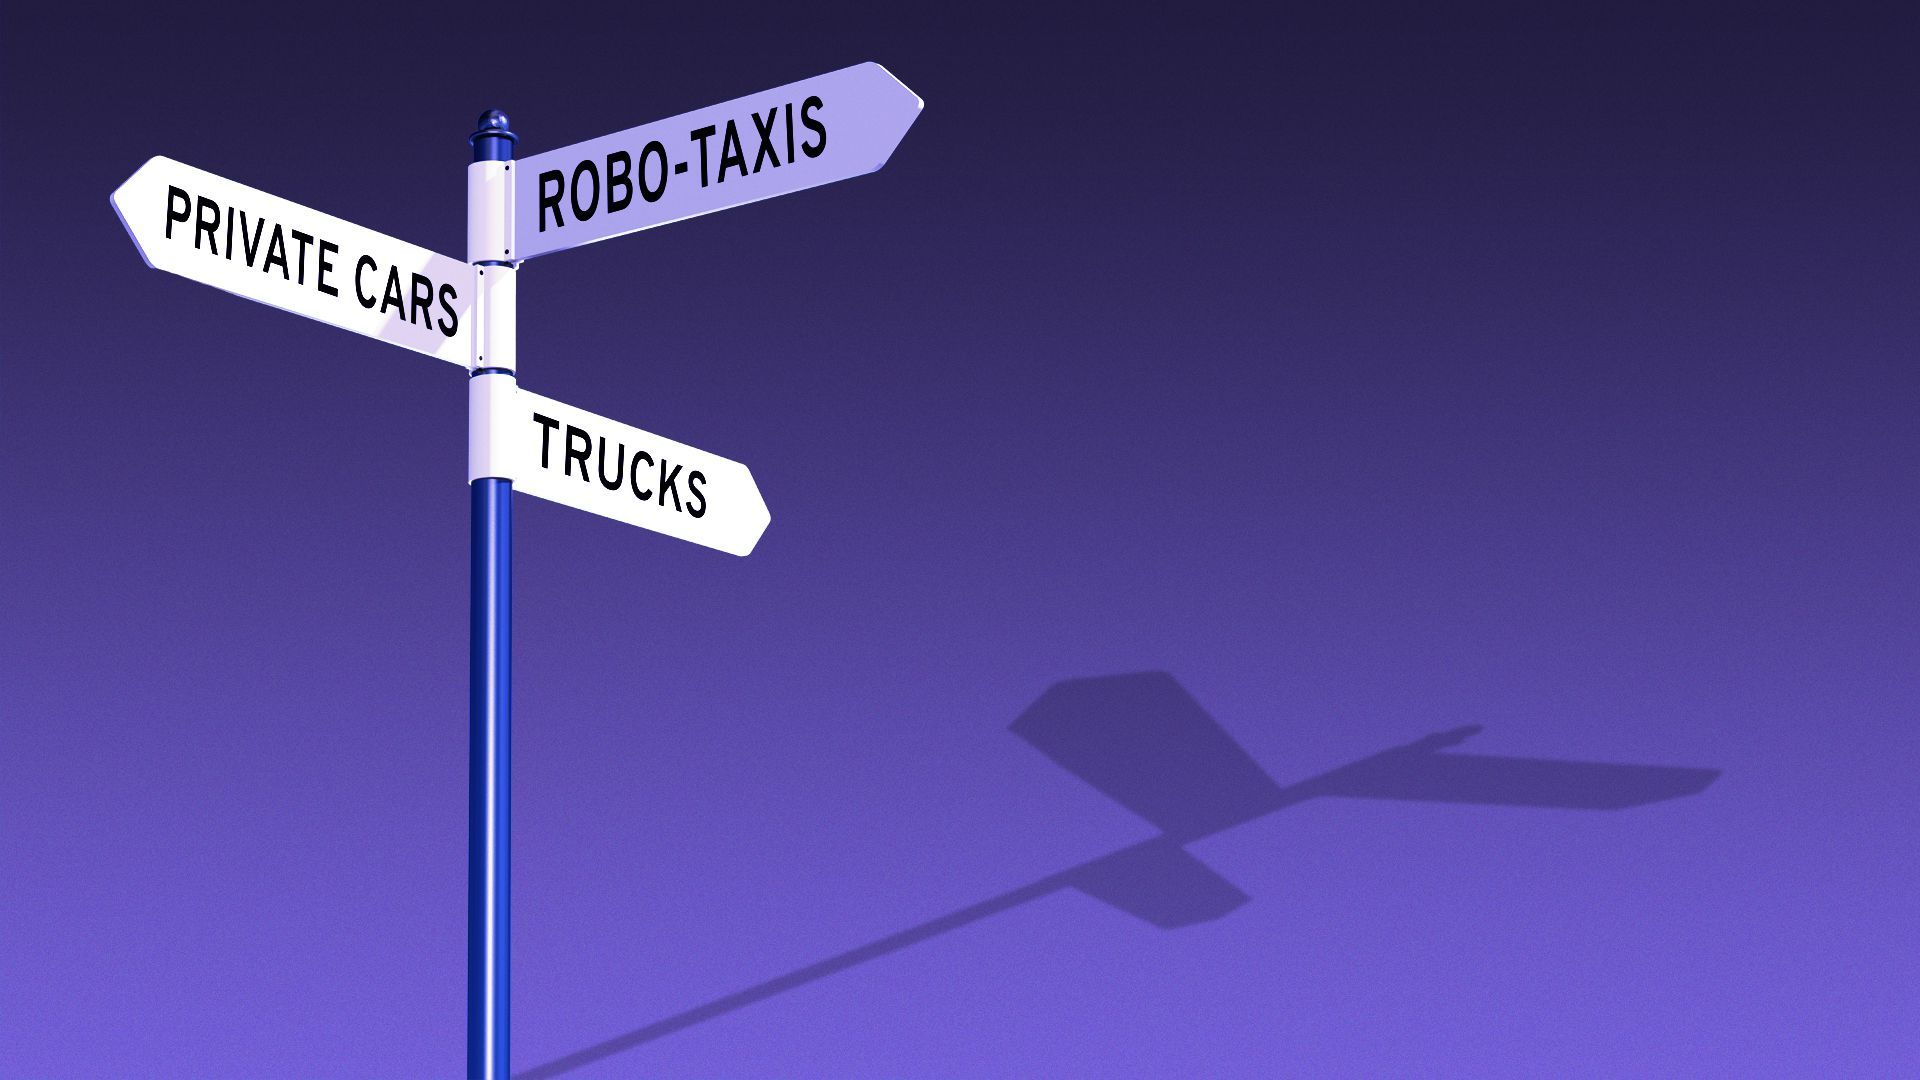 Illustration a sign post with three signs: “Robo-taxis,” “Trucks” and “Private Cars”.